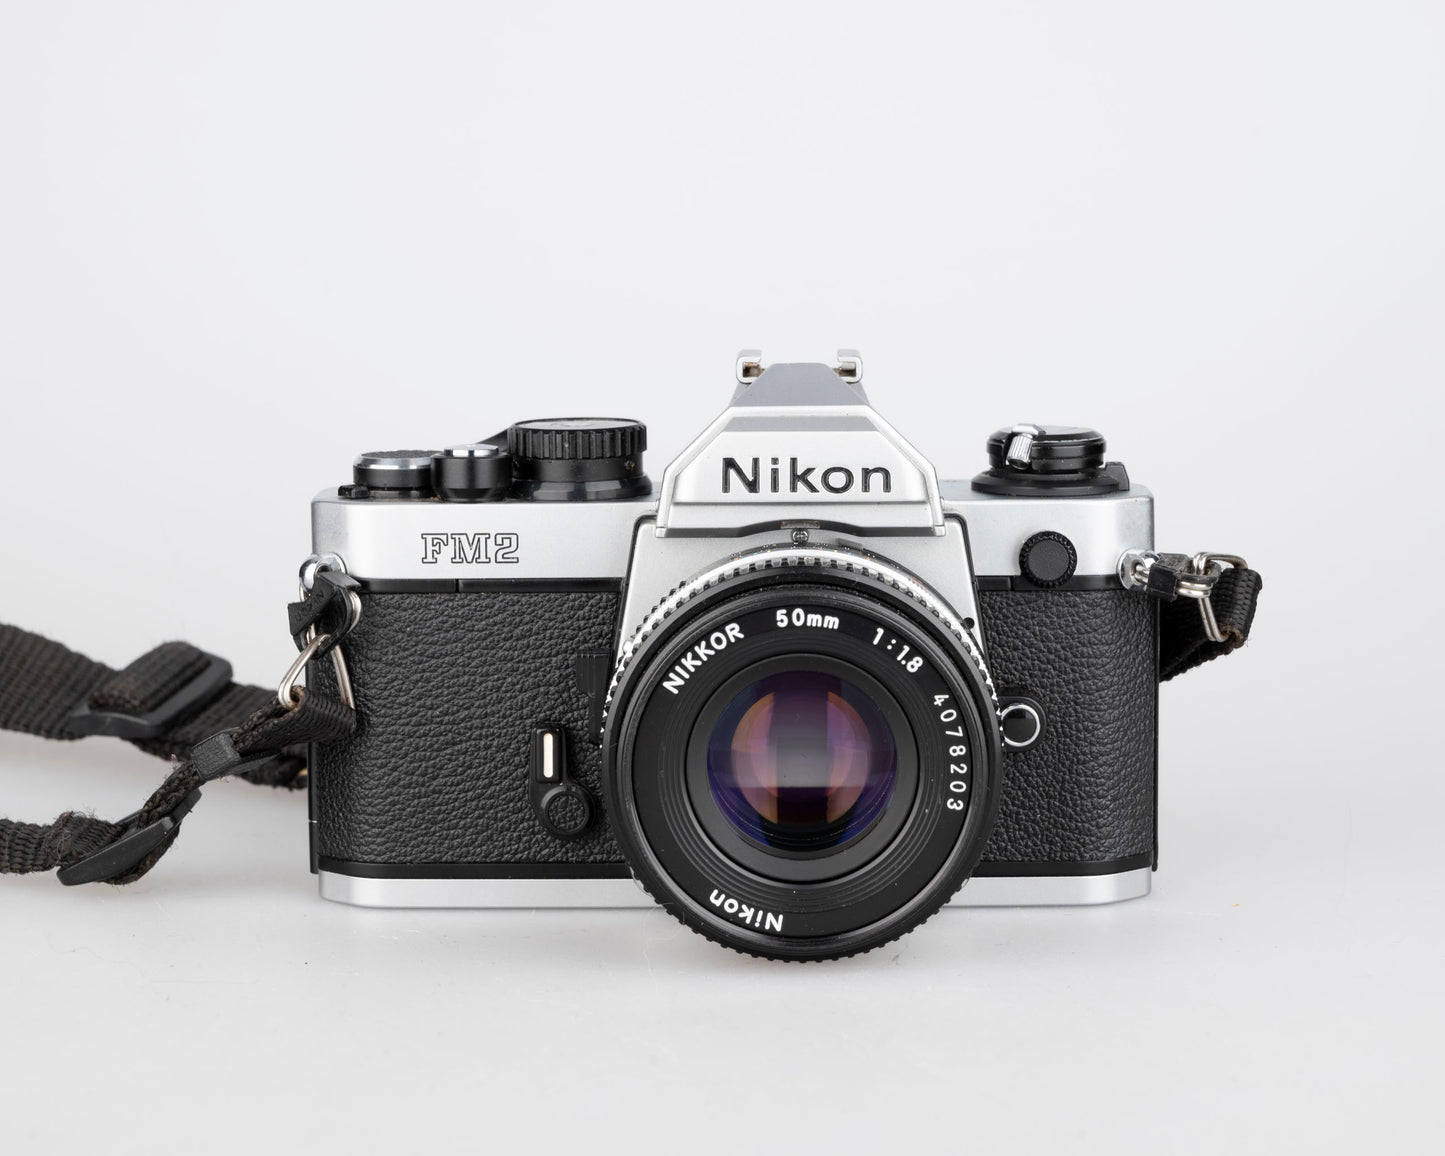 Nikon FM2n 35mm film SLR camera w/ Nikkor 50mm f1.8 lens + manuals in English and French (serial 8518258)